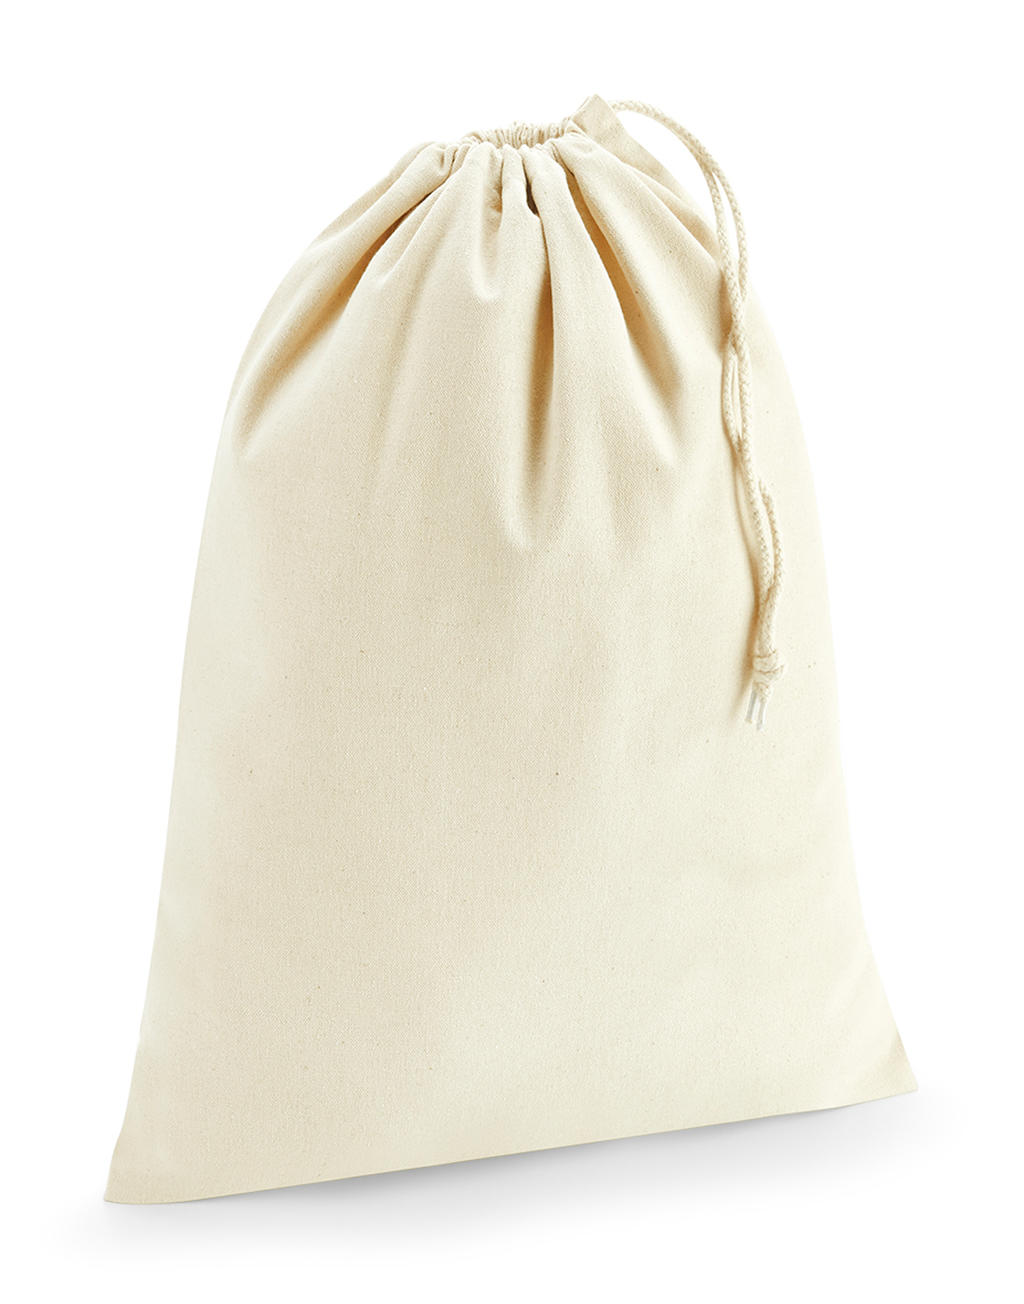  Revive Recycled Stuff Bag in Farbe Natural